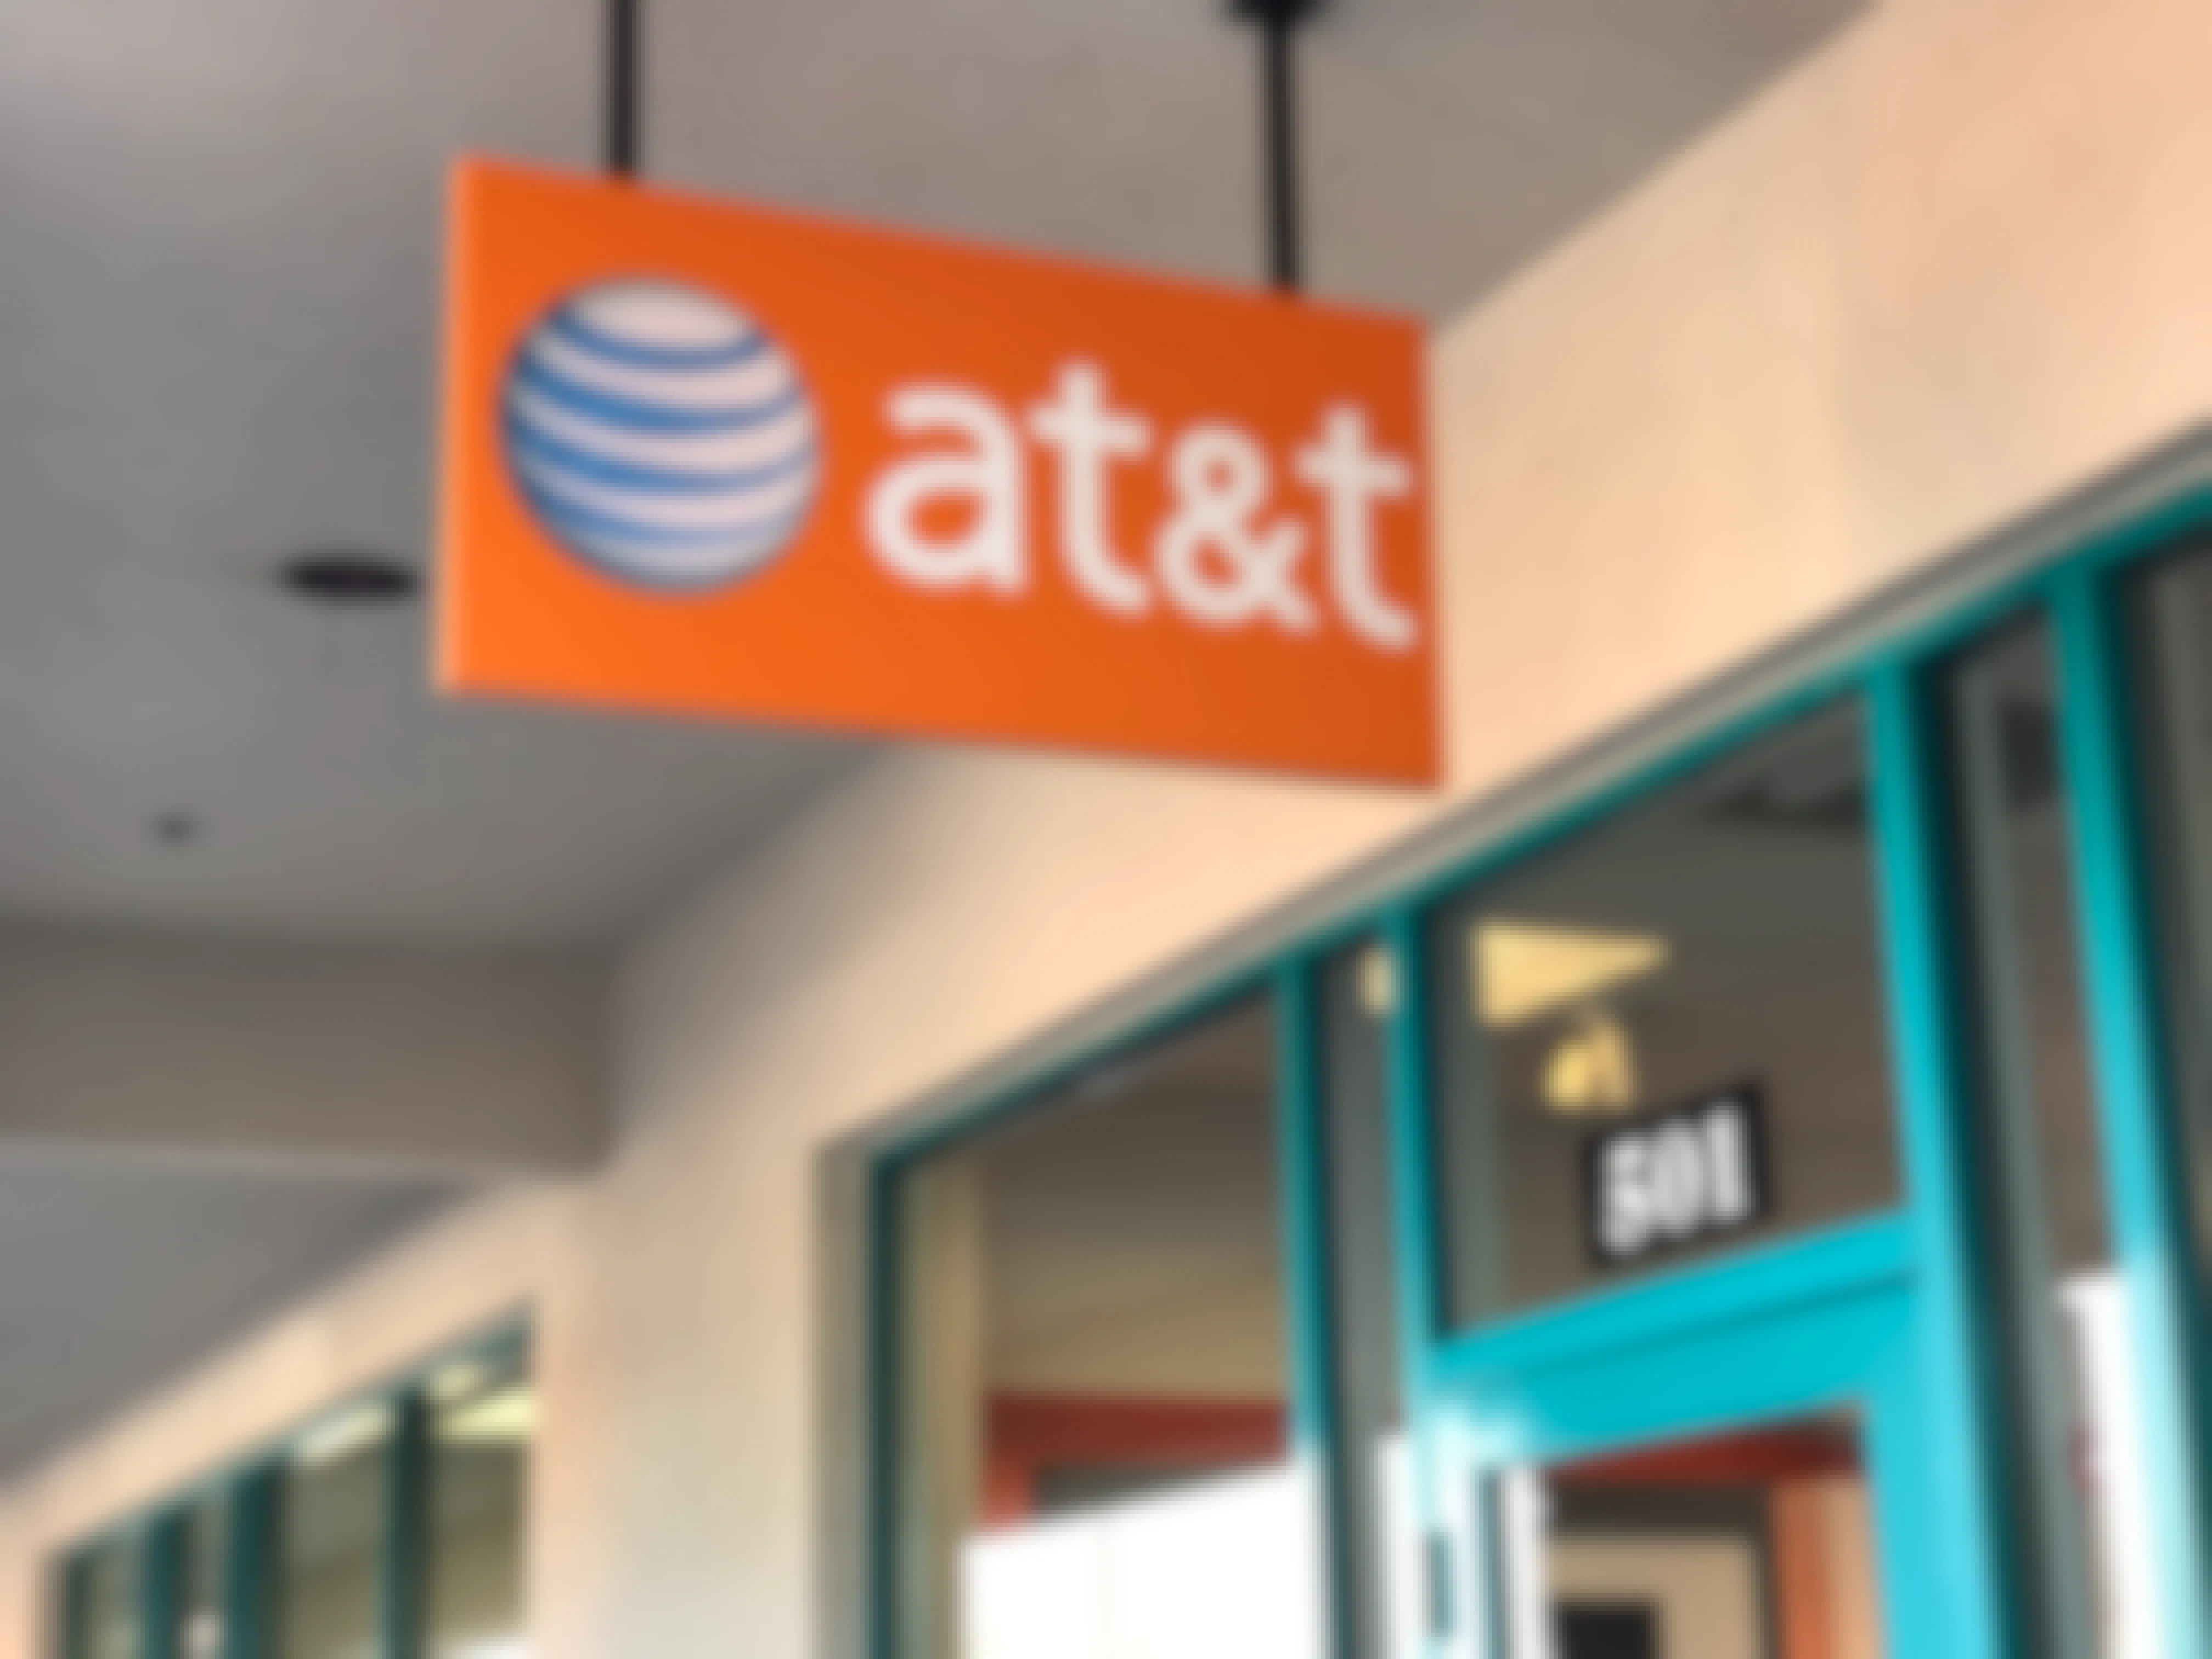 at&t store entrance and signage